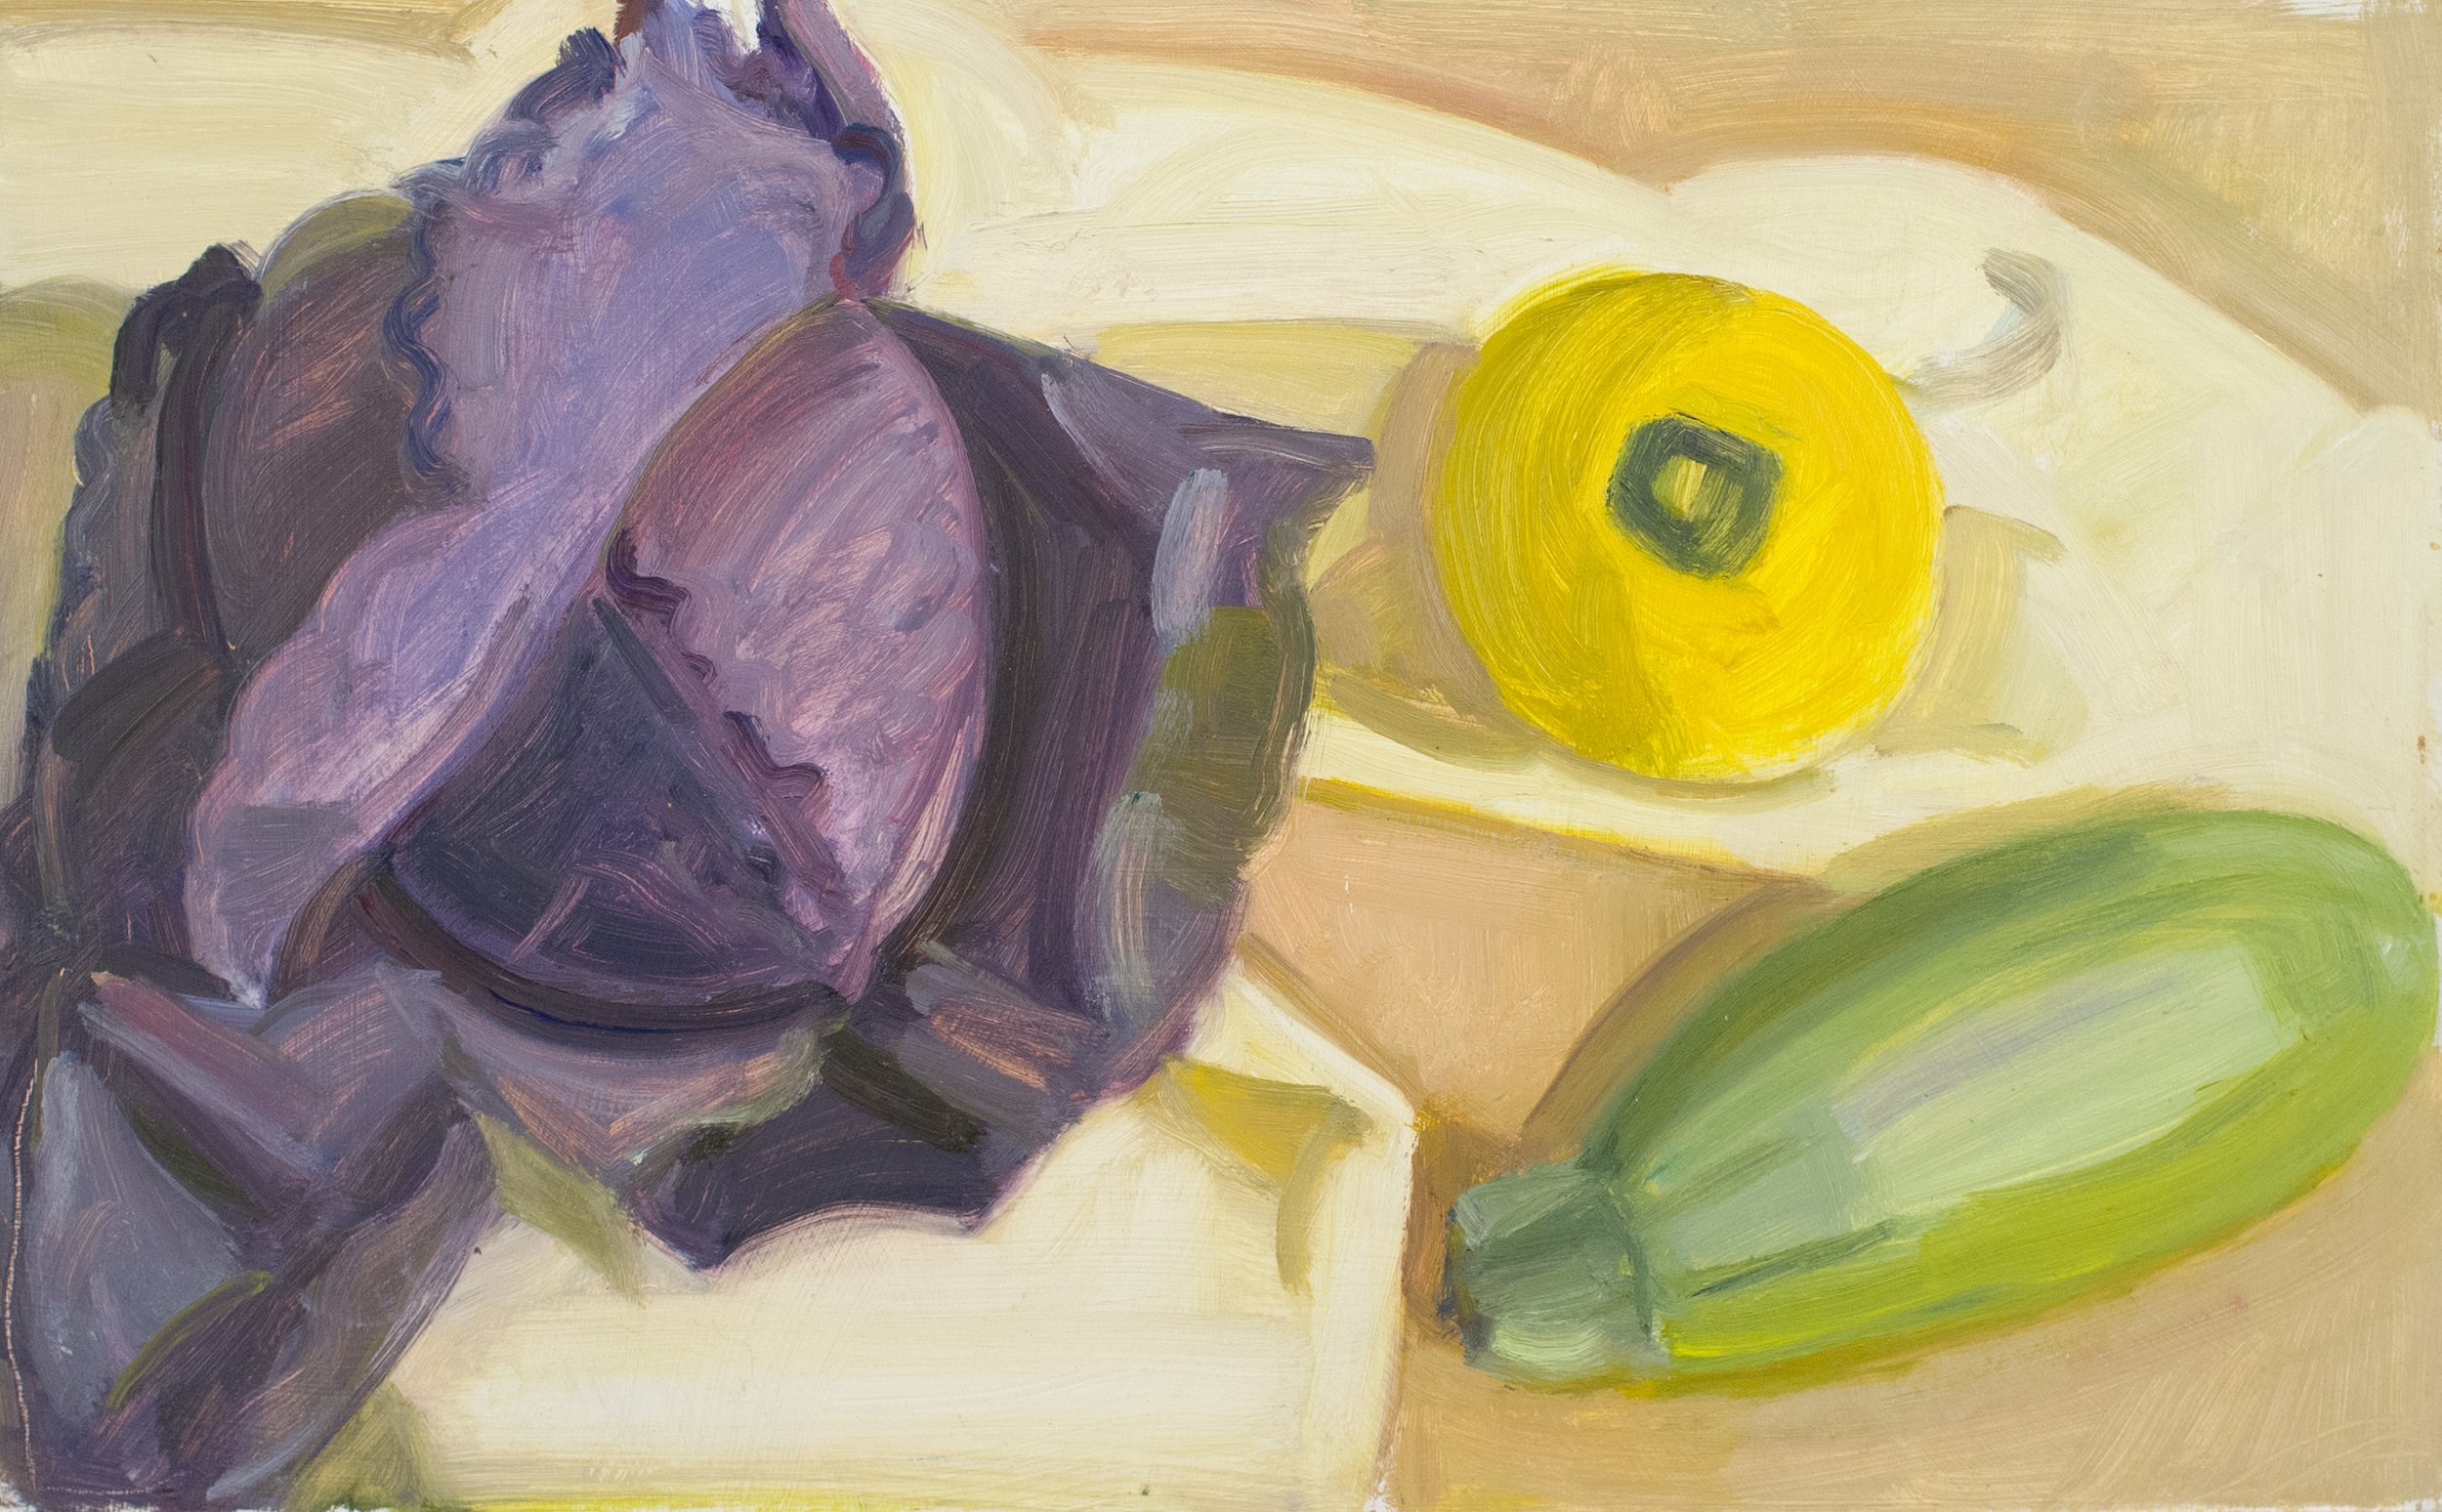   Purple Cabbage, Pale Green Tiger and Pattypan Squash , c. 2012, oil/panel, 10” x 16 in. (Private collection)  